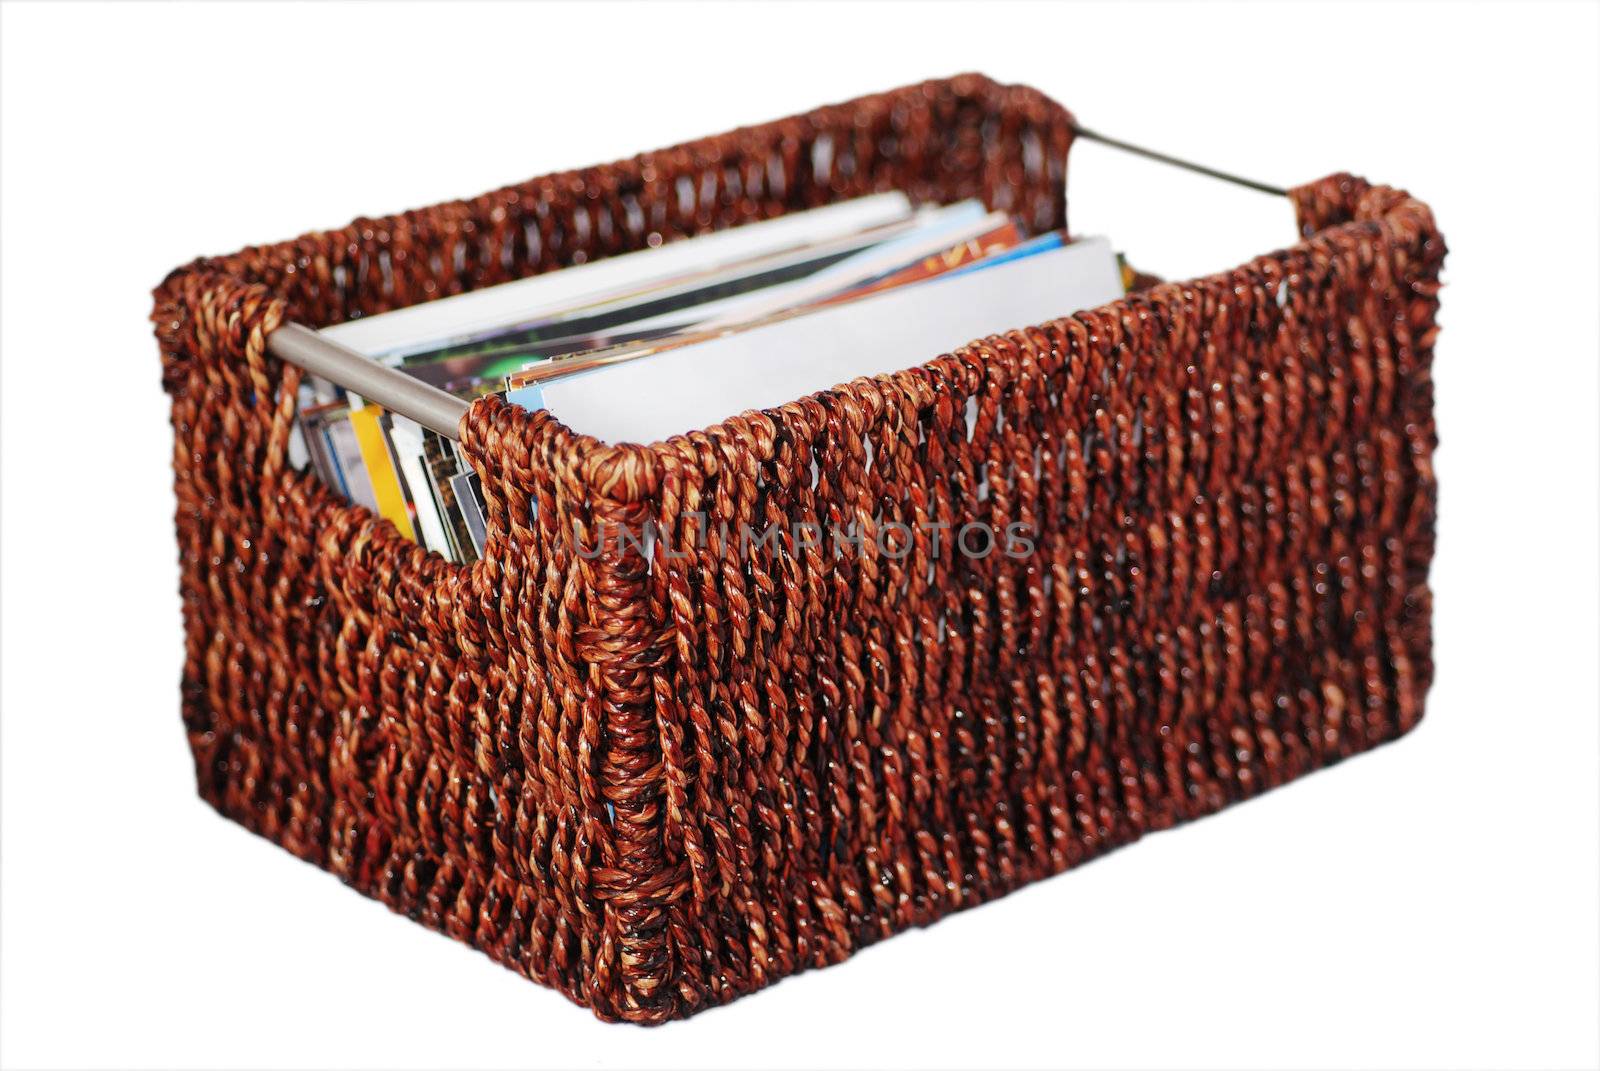 Wicker Basket of Photographs by pwillitts